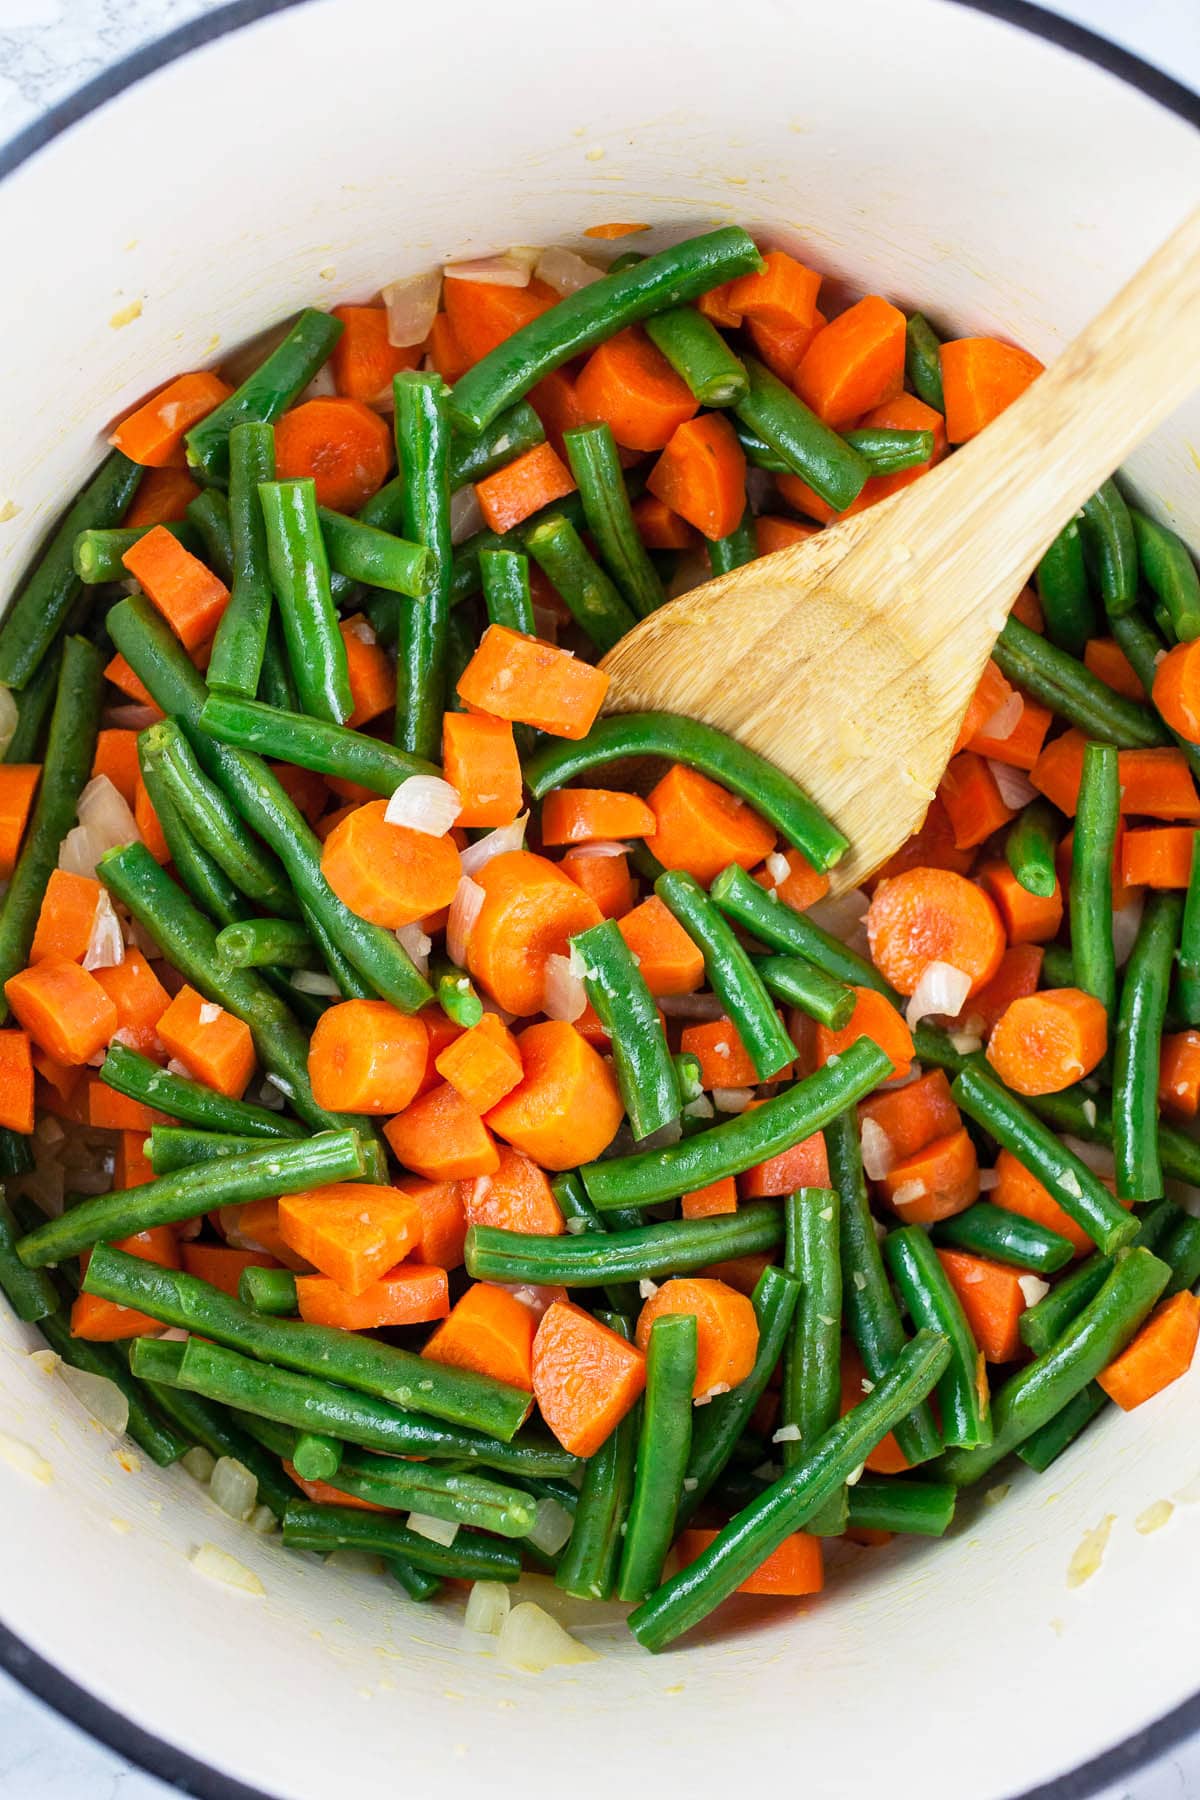 Green beans and carrots sautéed in Dutch oven with wooden spoon.